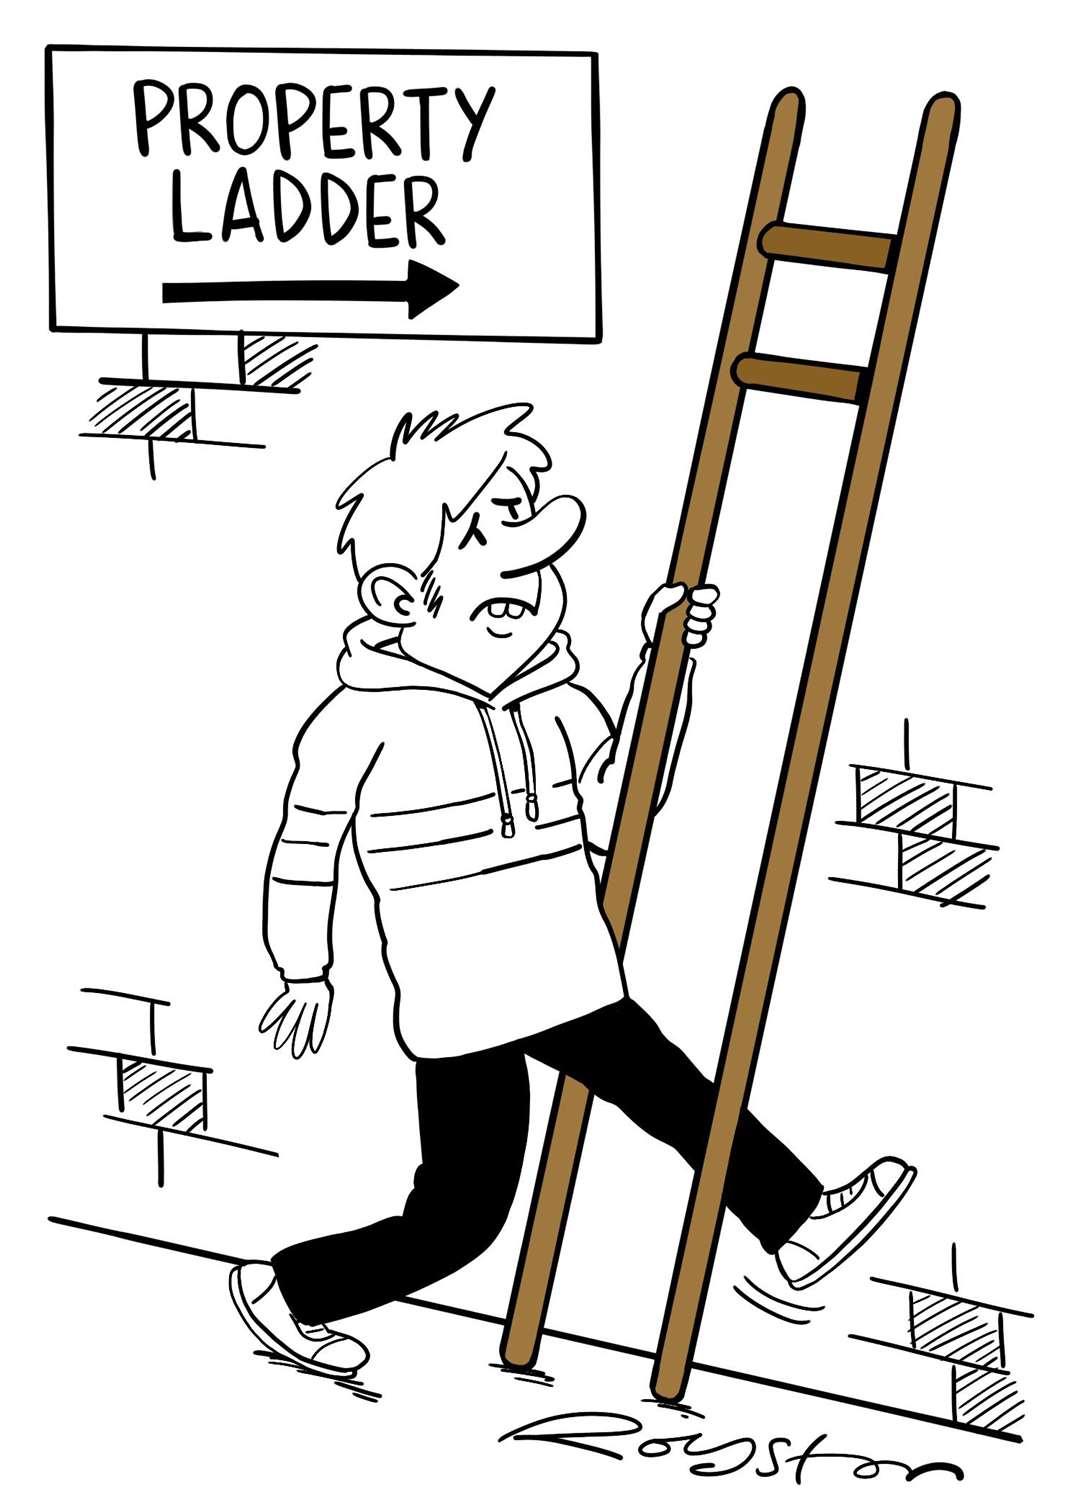 The almost impossible task of getting on the property ladder. By Royston Robertson